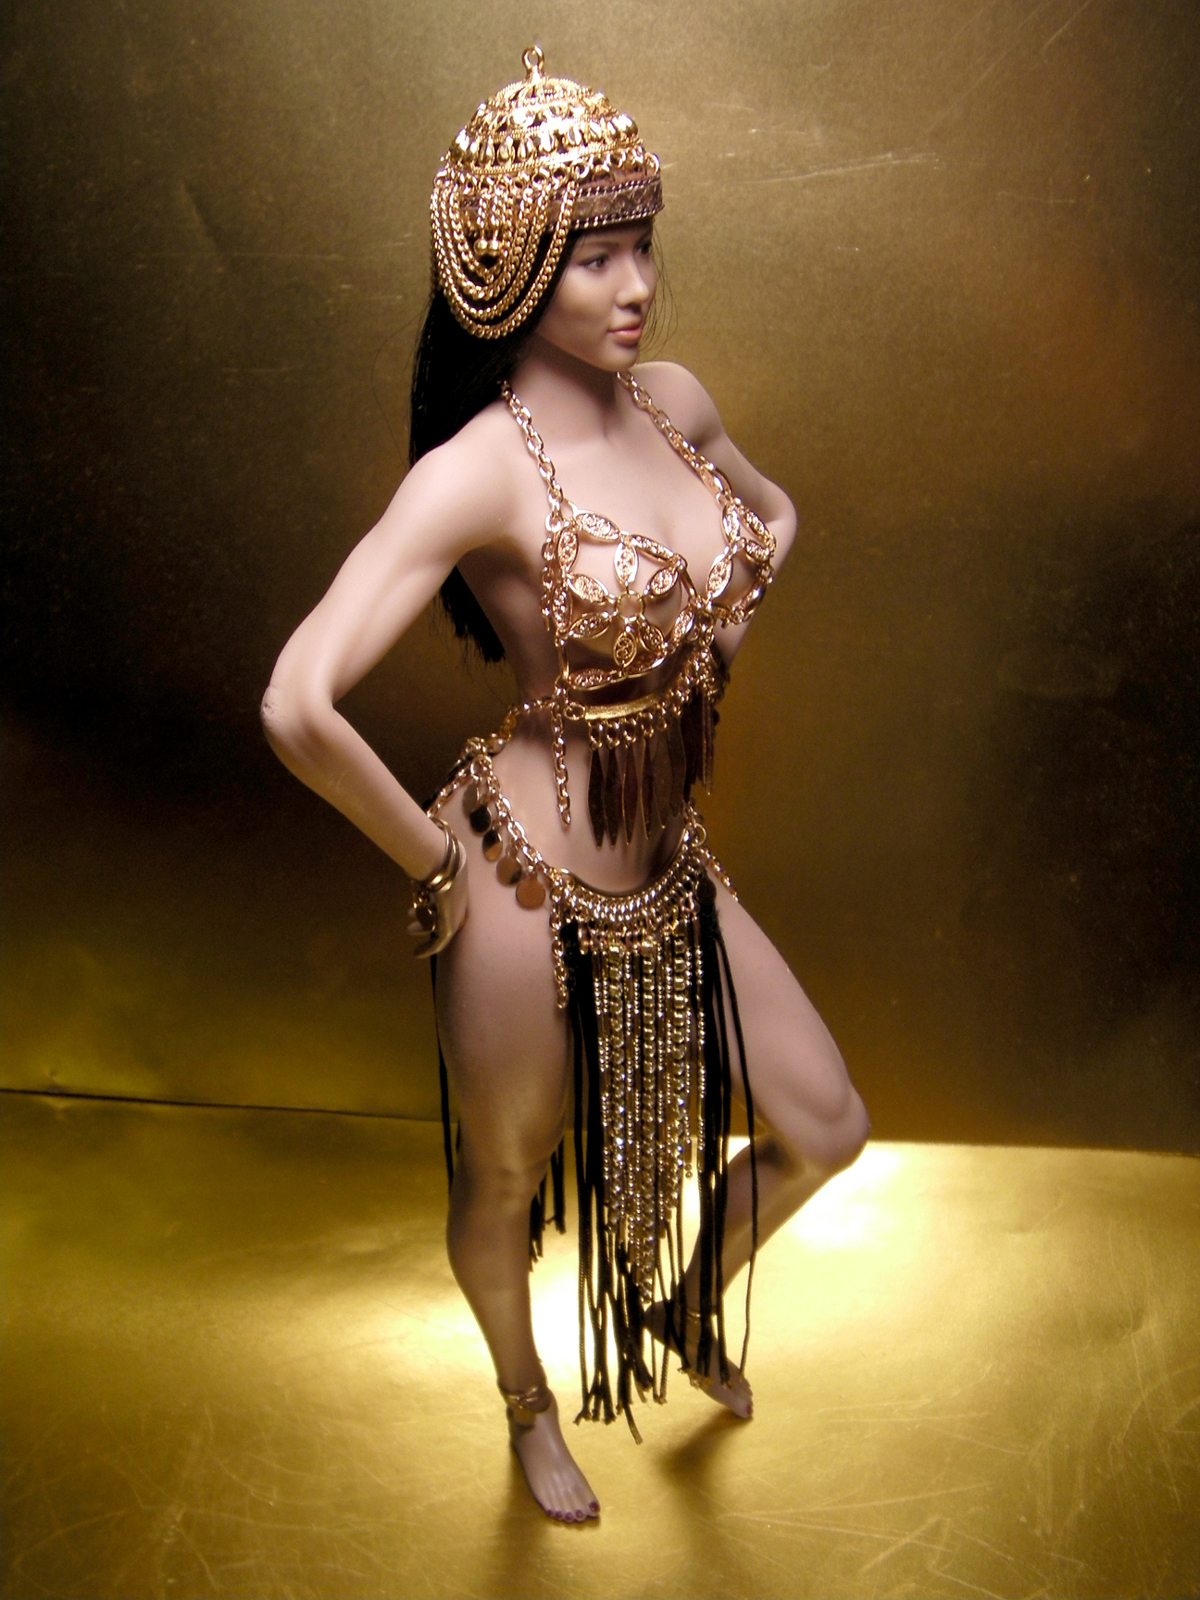 Continuation of the post Harem of the Sultan in Miniature 3 - My, Body, belly dance, Historical costume, Gladiator, Nudity, Topless, Hurrem Sultan, Decoration, Armor, Jointed doll, Phicen, Dollhouse, Youtube, Video, Longpost, 